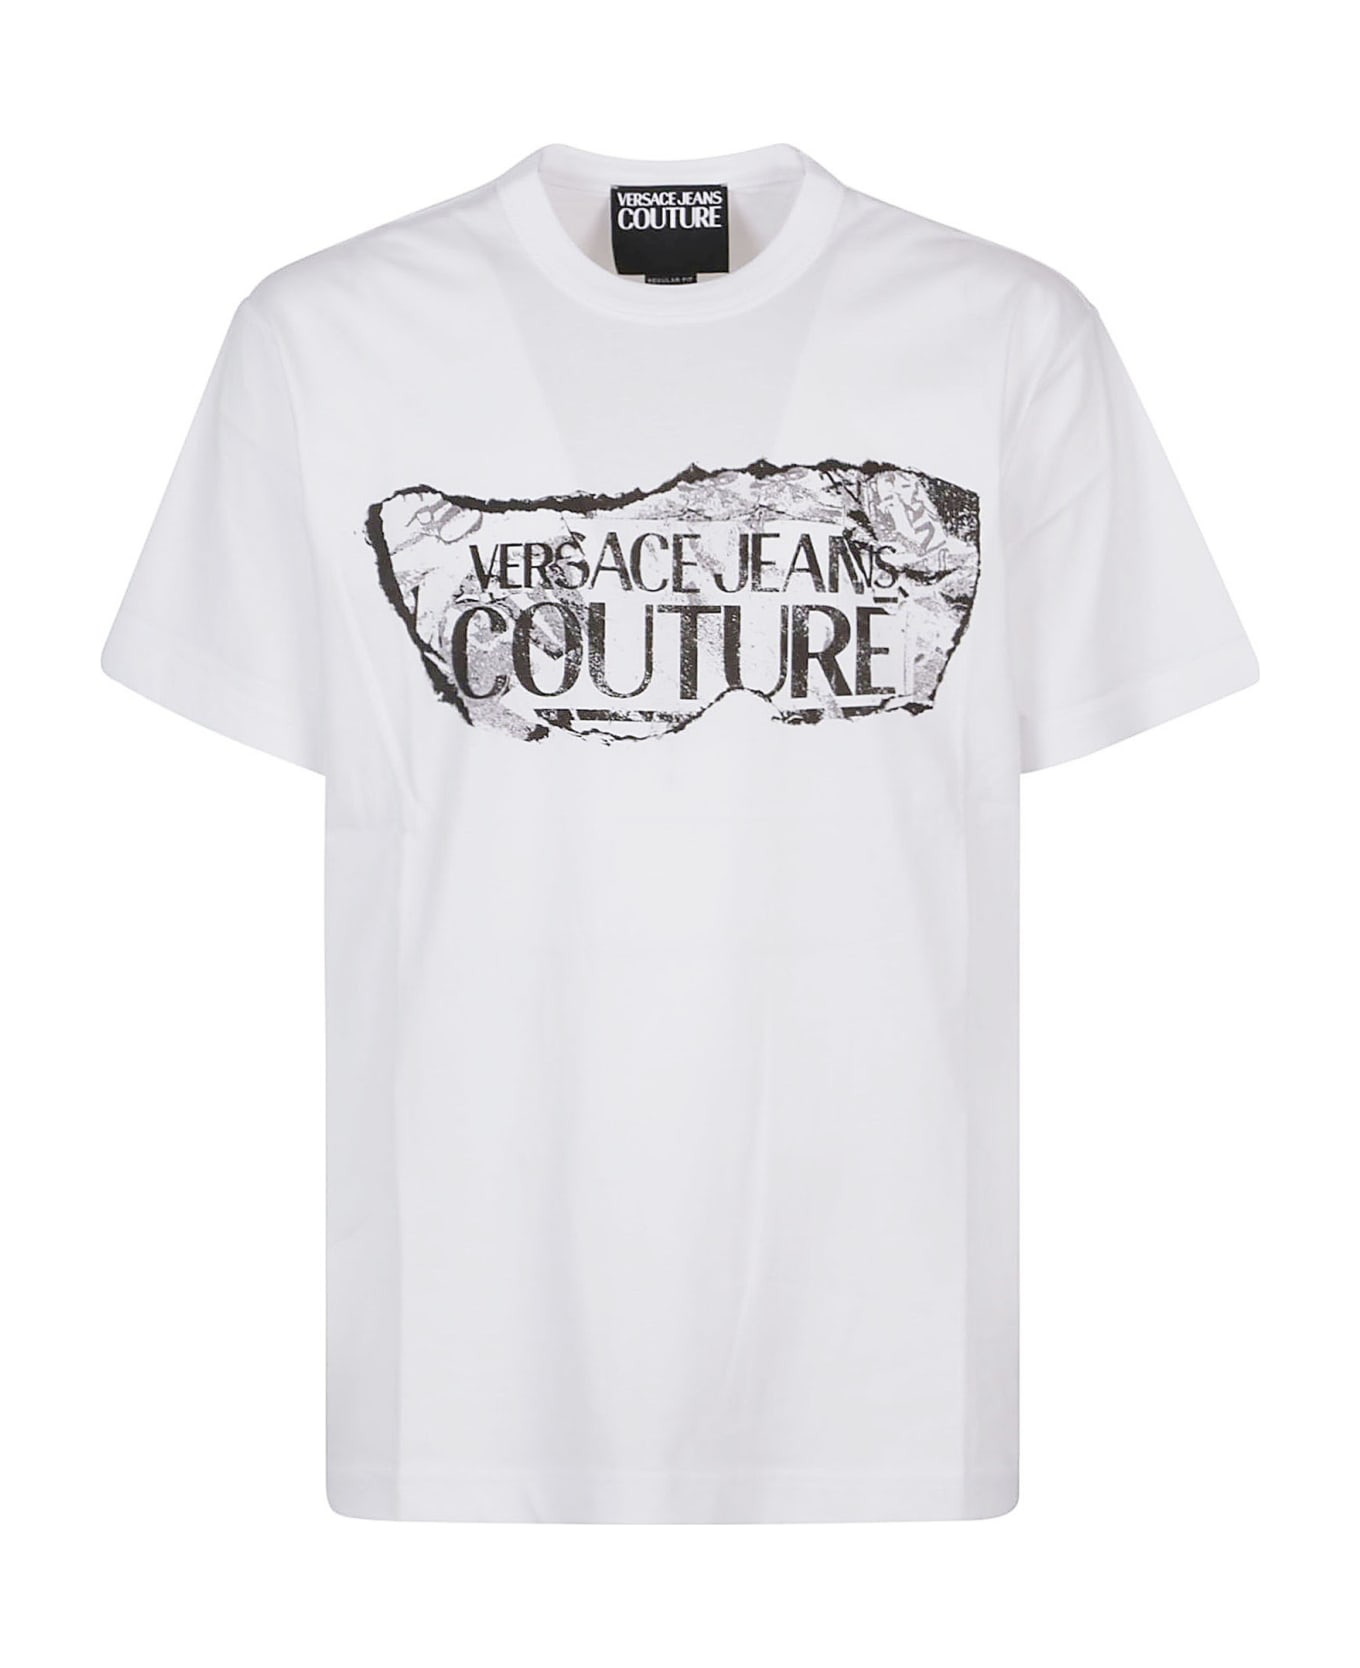 Versace Jeans Couture Magazine Logo T-shirt - White